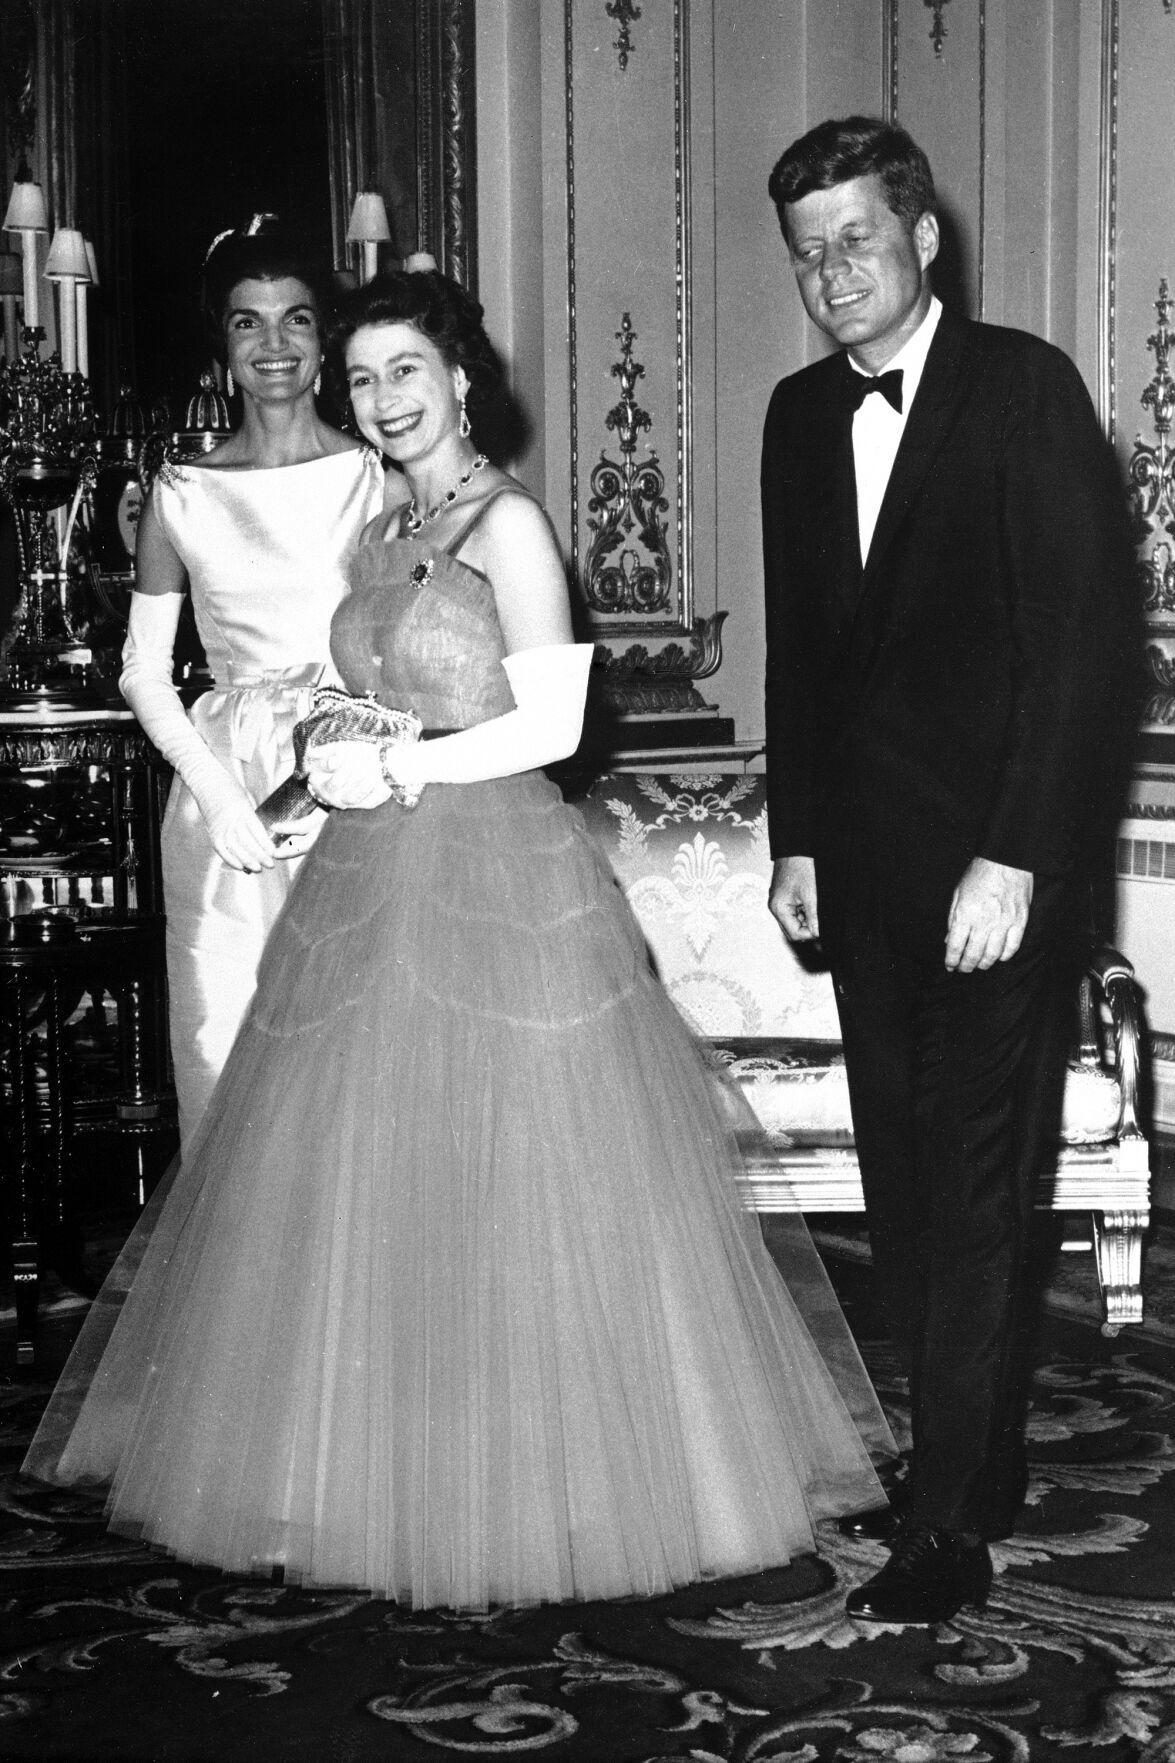 Photos: US presidents and Queen Elizabeth II through the years